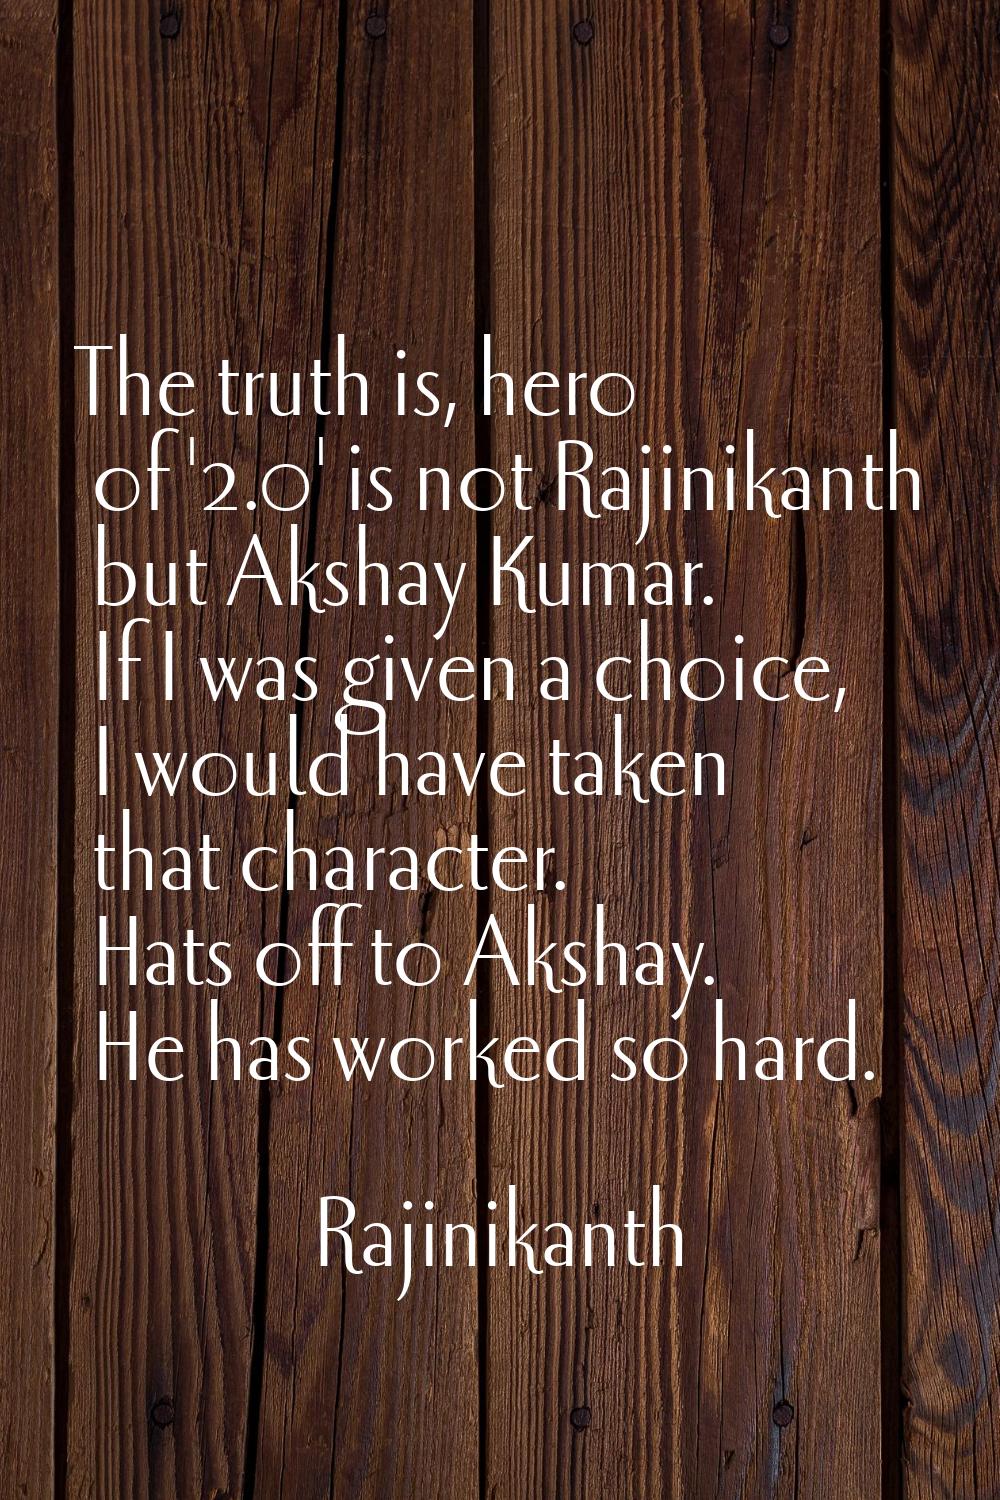 The truth is, hero of '2.0' is not Rajinikanth but Akshay Kumar. If I was given a choice, I would h